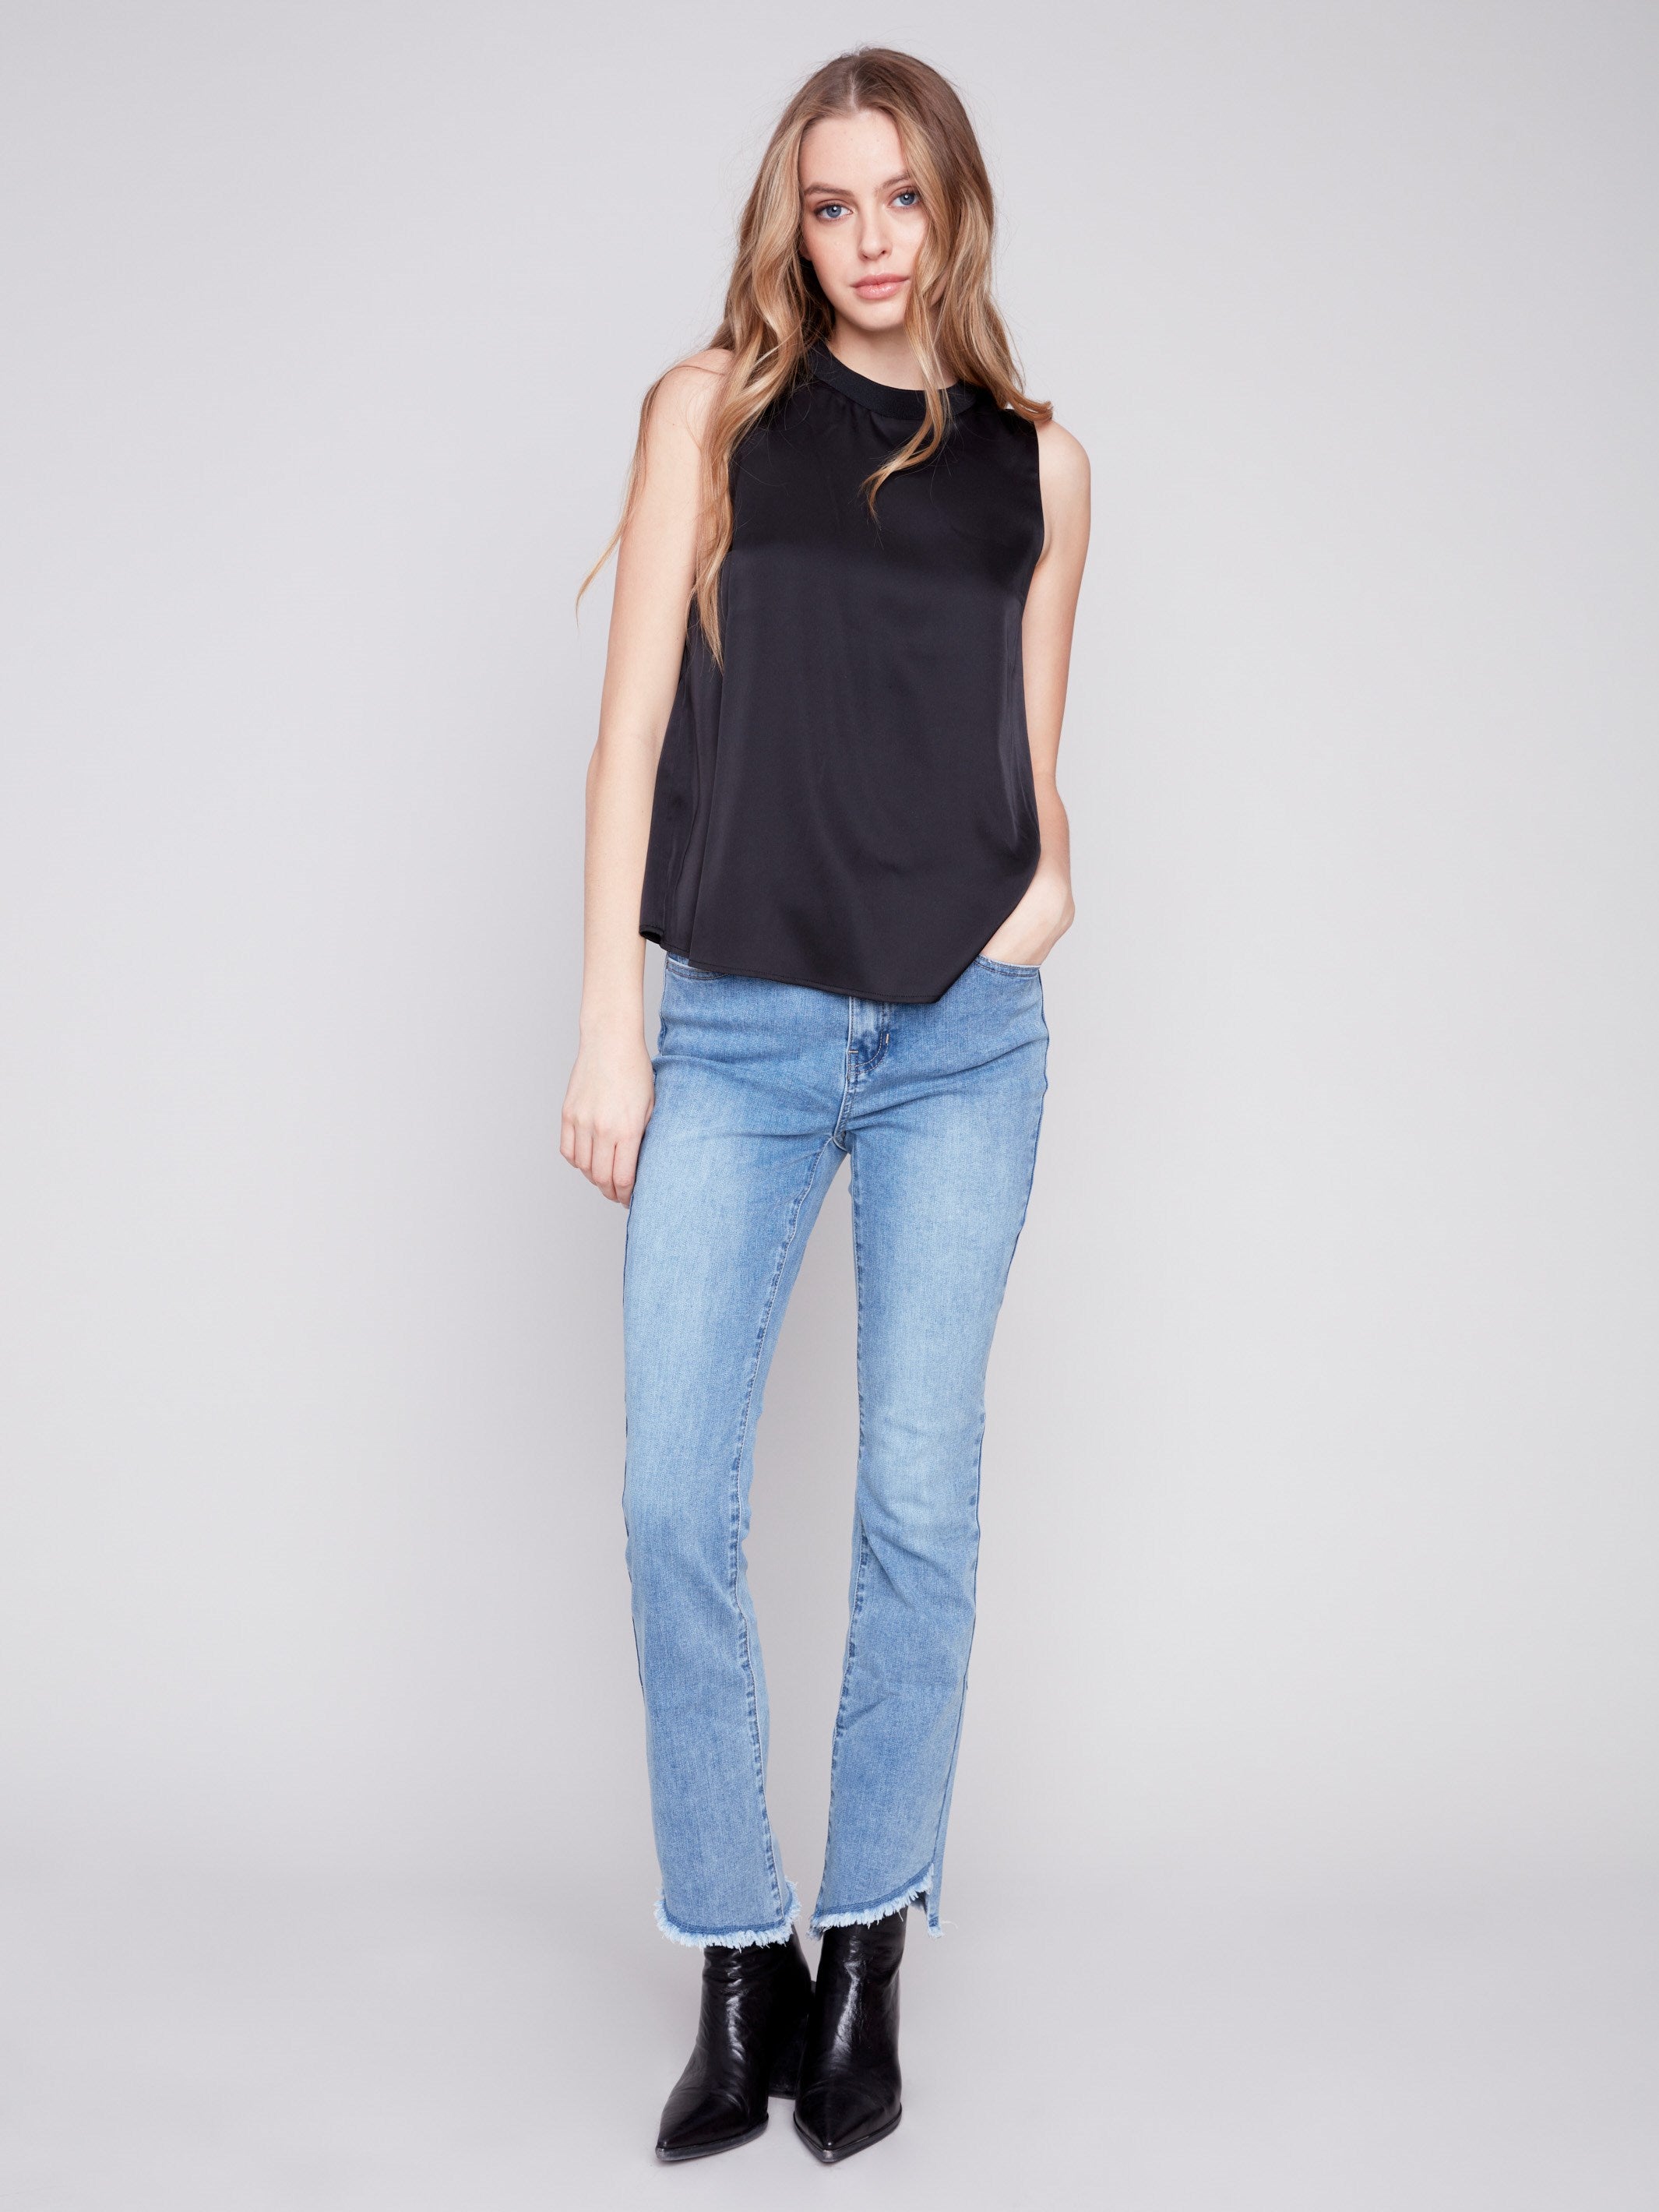 Bootcut Jeans with Asymmetrical Hem - Light Blue - Charlie B Collection Canada - Image 7